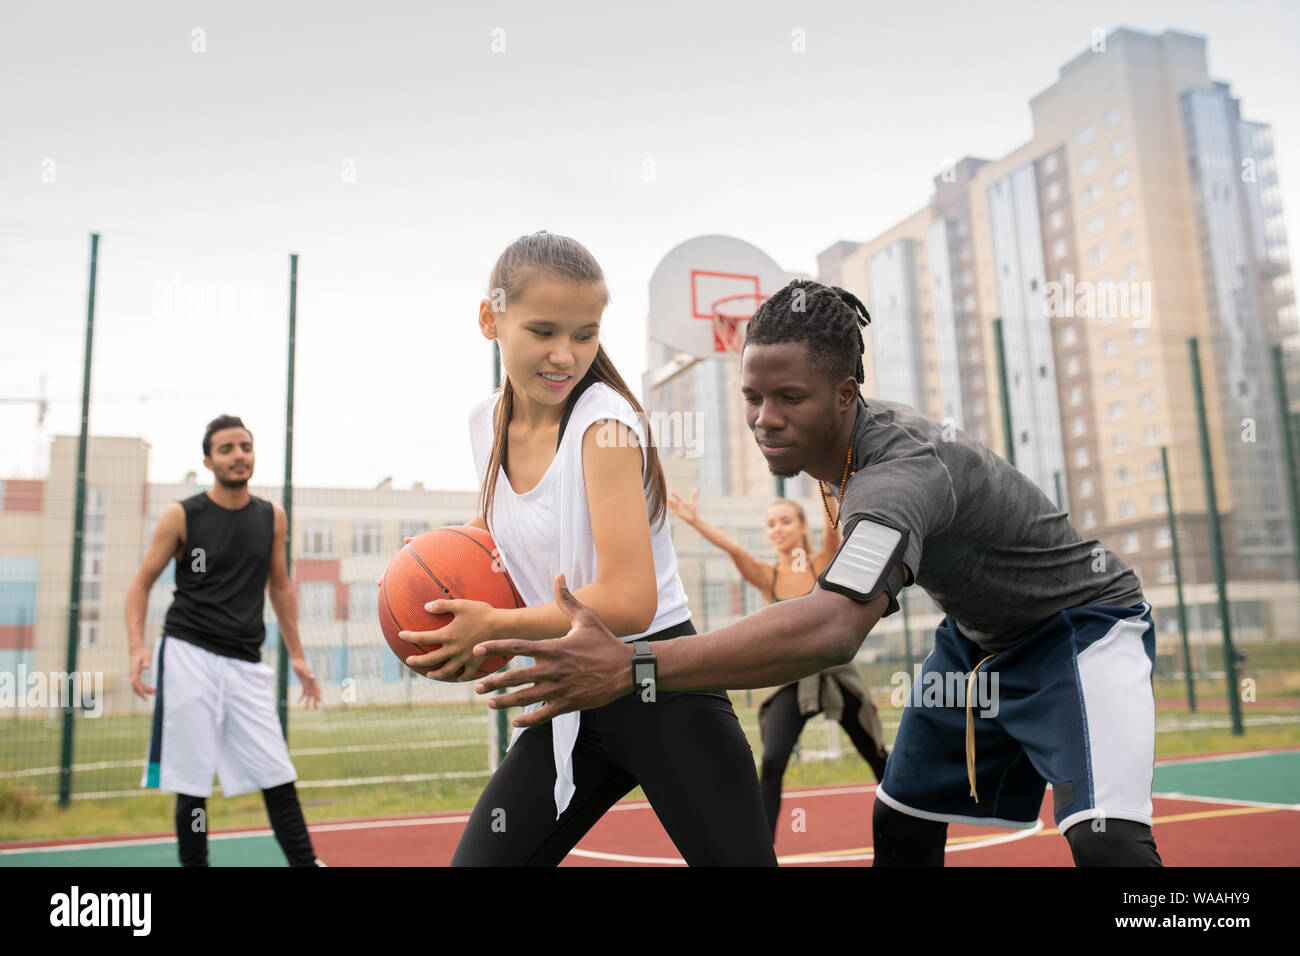 African basketballer keeping his hand by ball held by female player Stock Photo